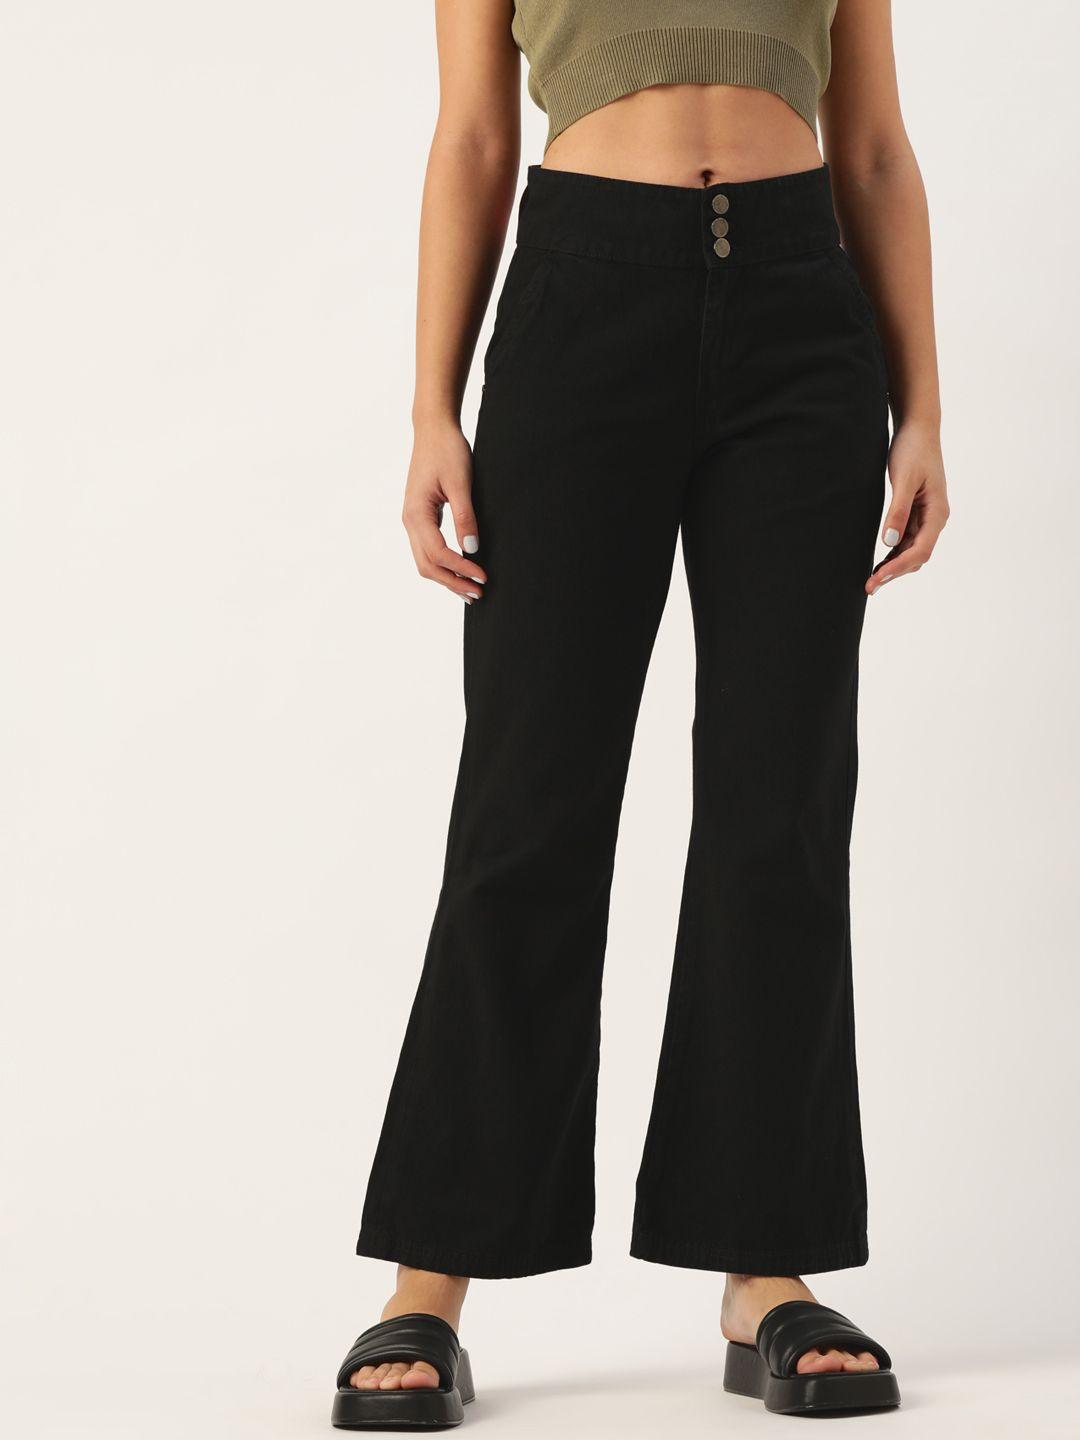 dressberry-women-black-flared-high-rise-stretchable-jeans